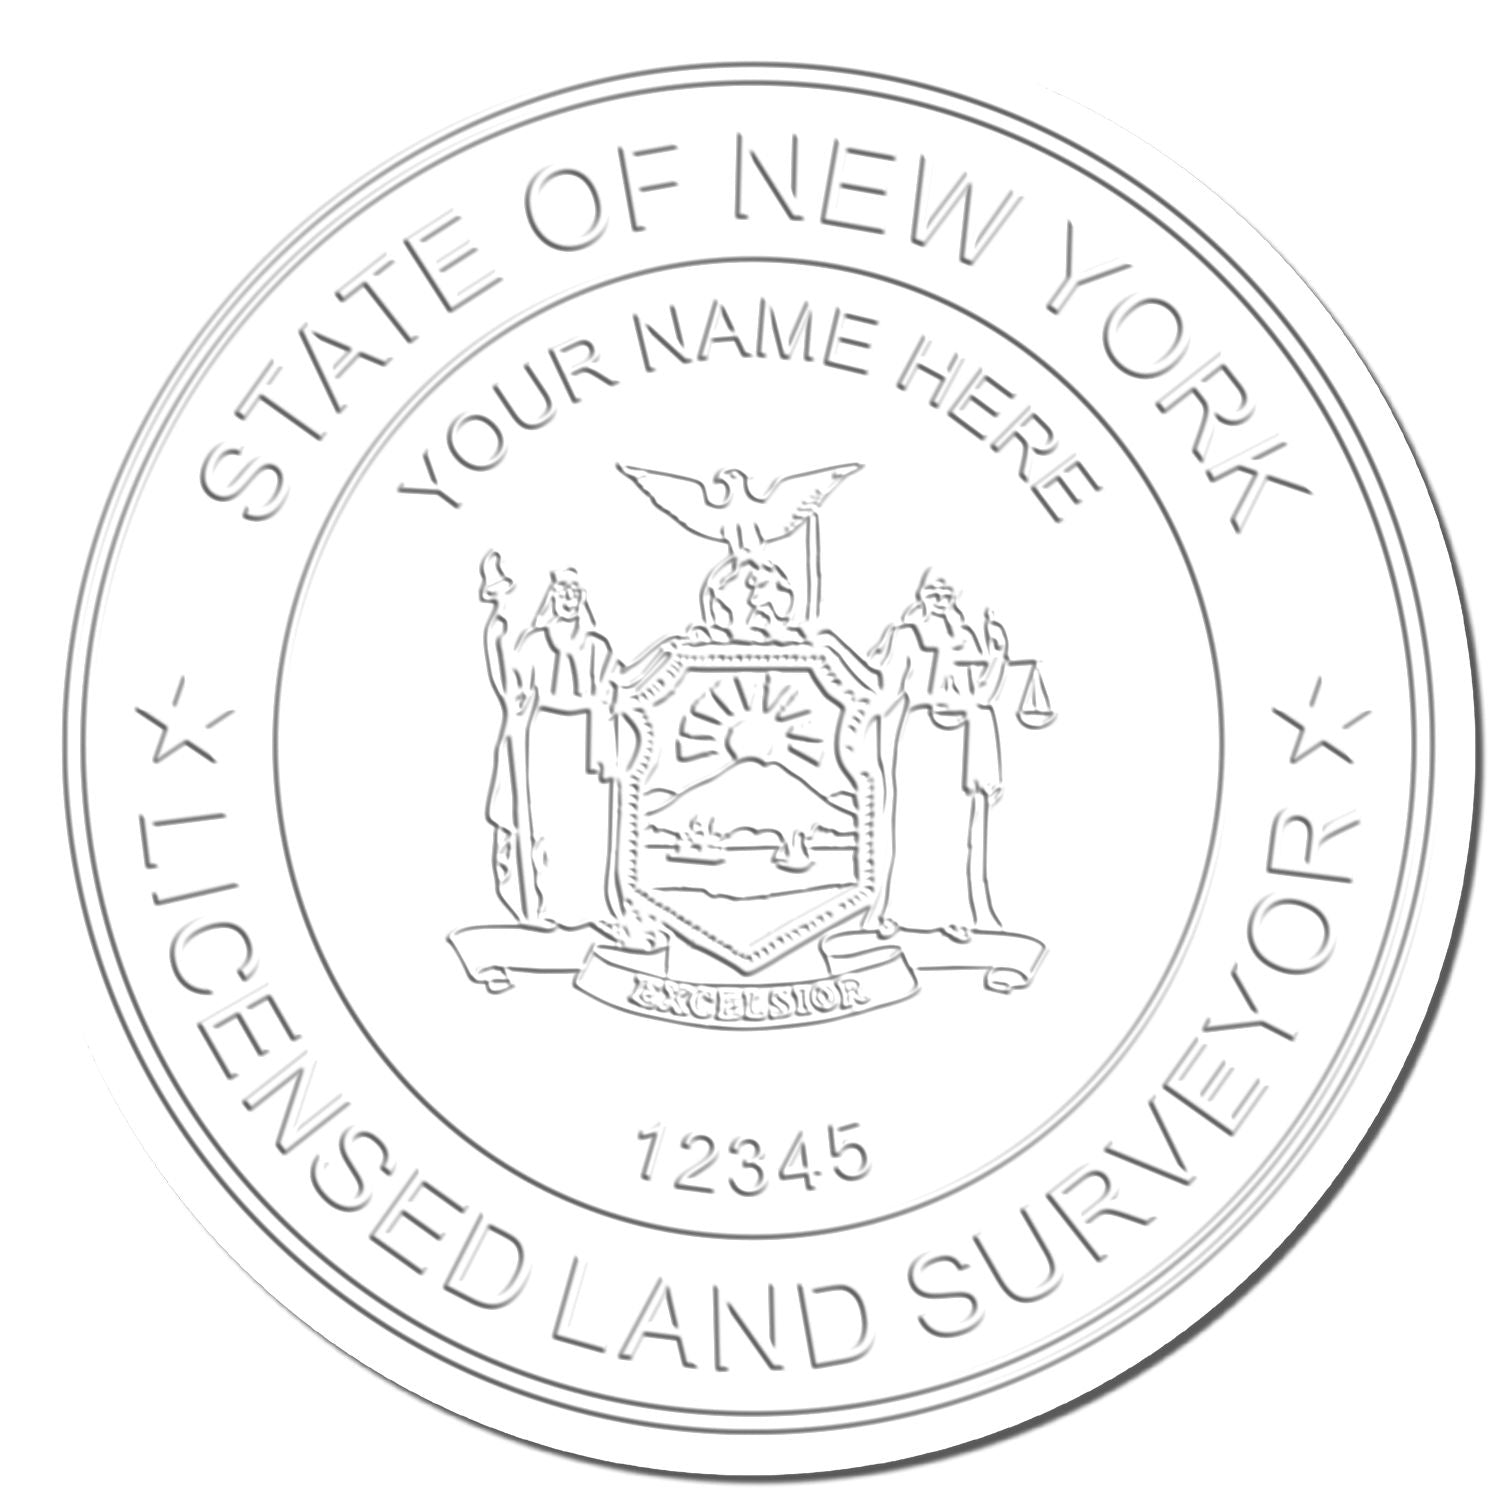 This paper is stamped with a sample imprint of the Gift New York Land Surveyor Seal, signifying its quality and reliability.